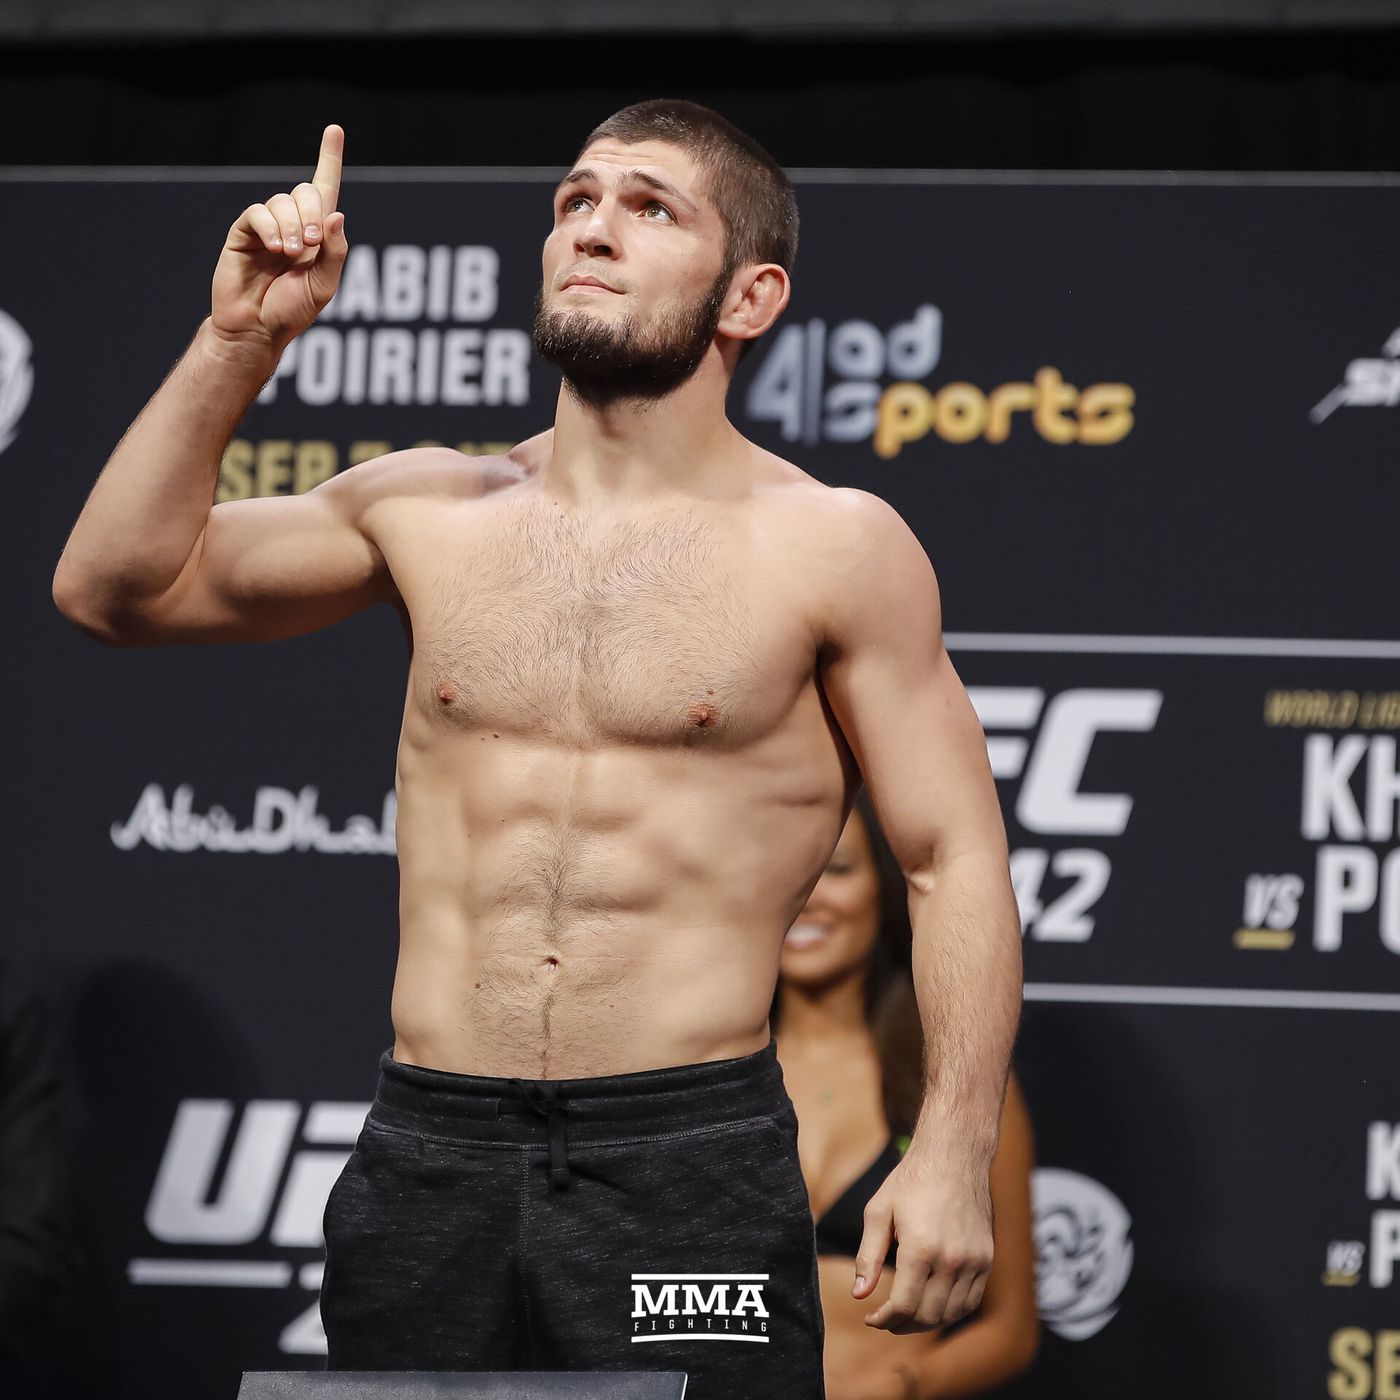 $40 MIllion Worth Khabib Nurmagomedov Accused of 'Scamming' By MMA Twitter as a Fan Claims to Lose $1k- 'Garbage'